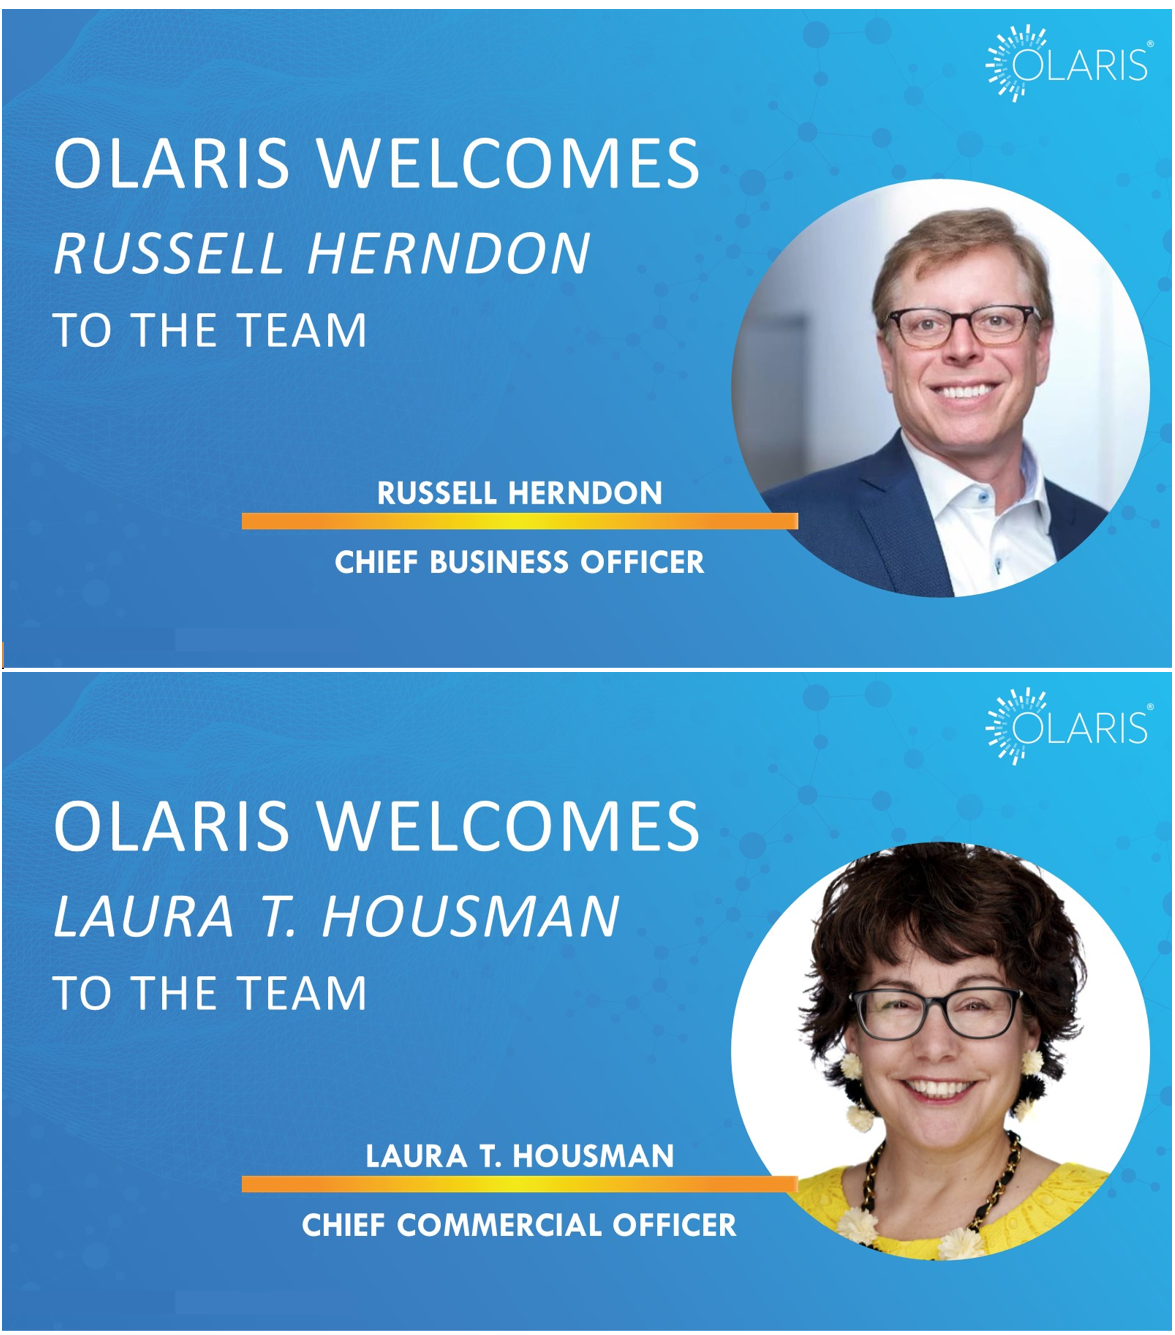 Olaris Welcomes Russell Herndon and Laura T. Housman